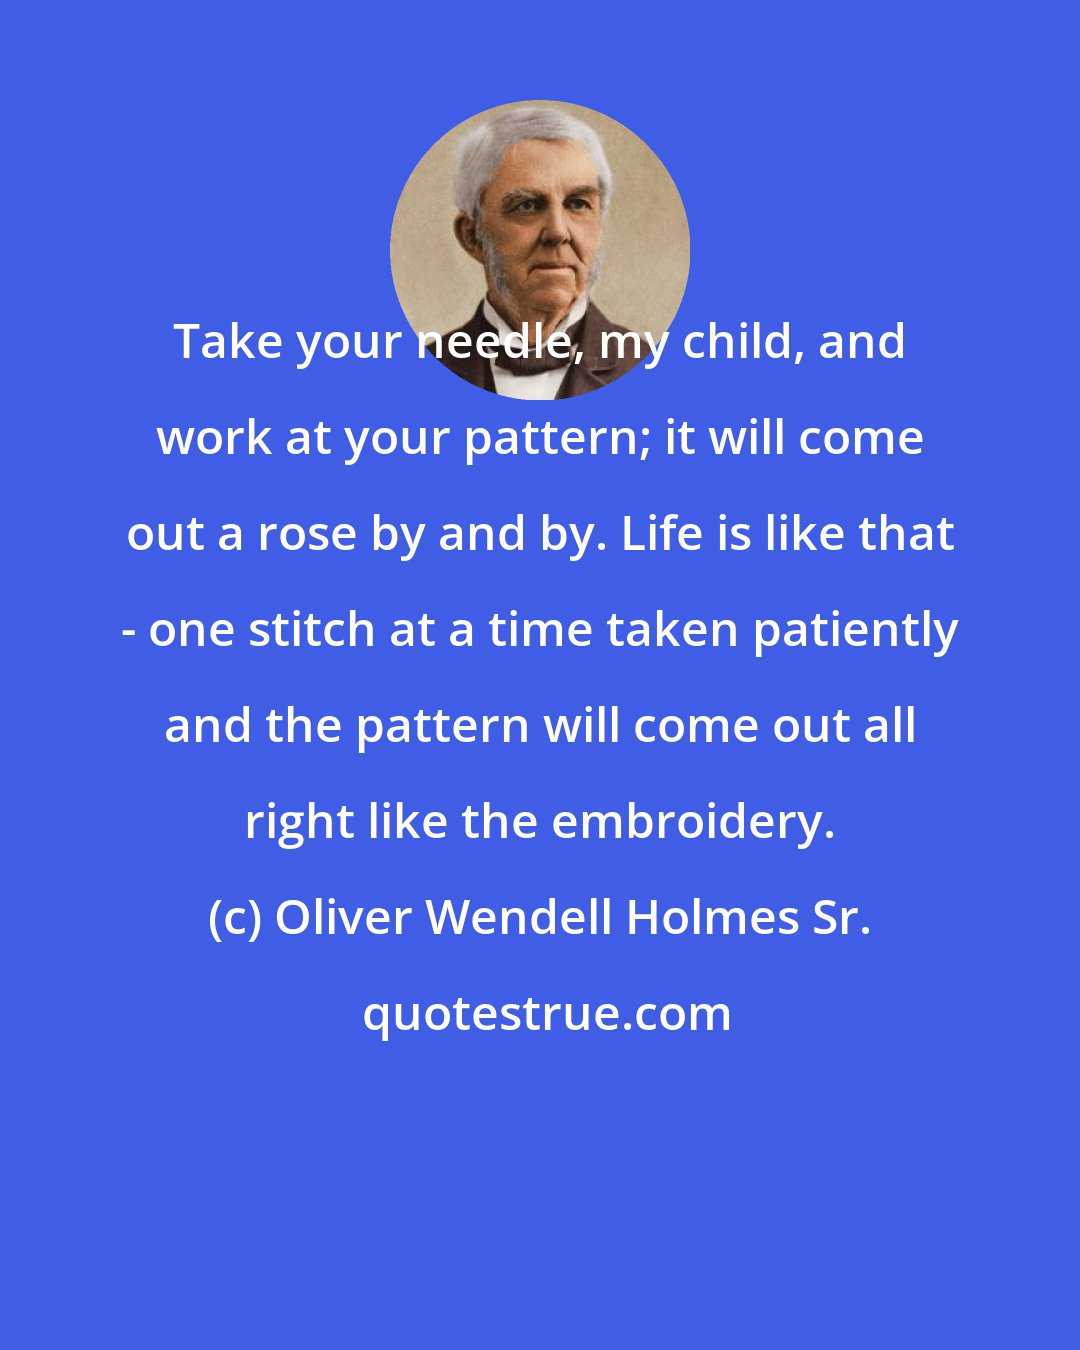 Oliver Wendell Holmes Sr.: Take your needle, my child, and work at your pattern; it will come out a rose by and by. Life is like that - one stitch at a time taken patiently and the pattern will come out all right like the embroidery.